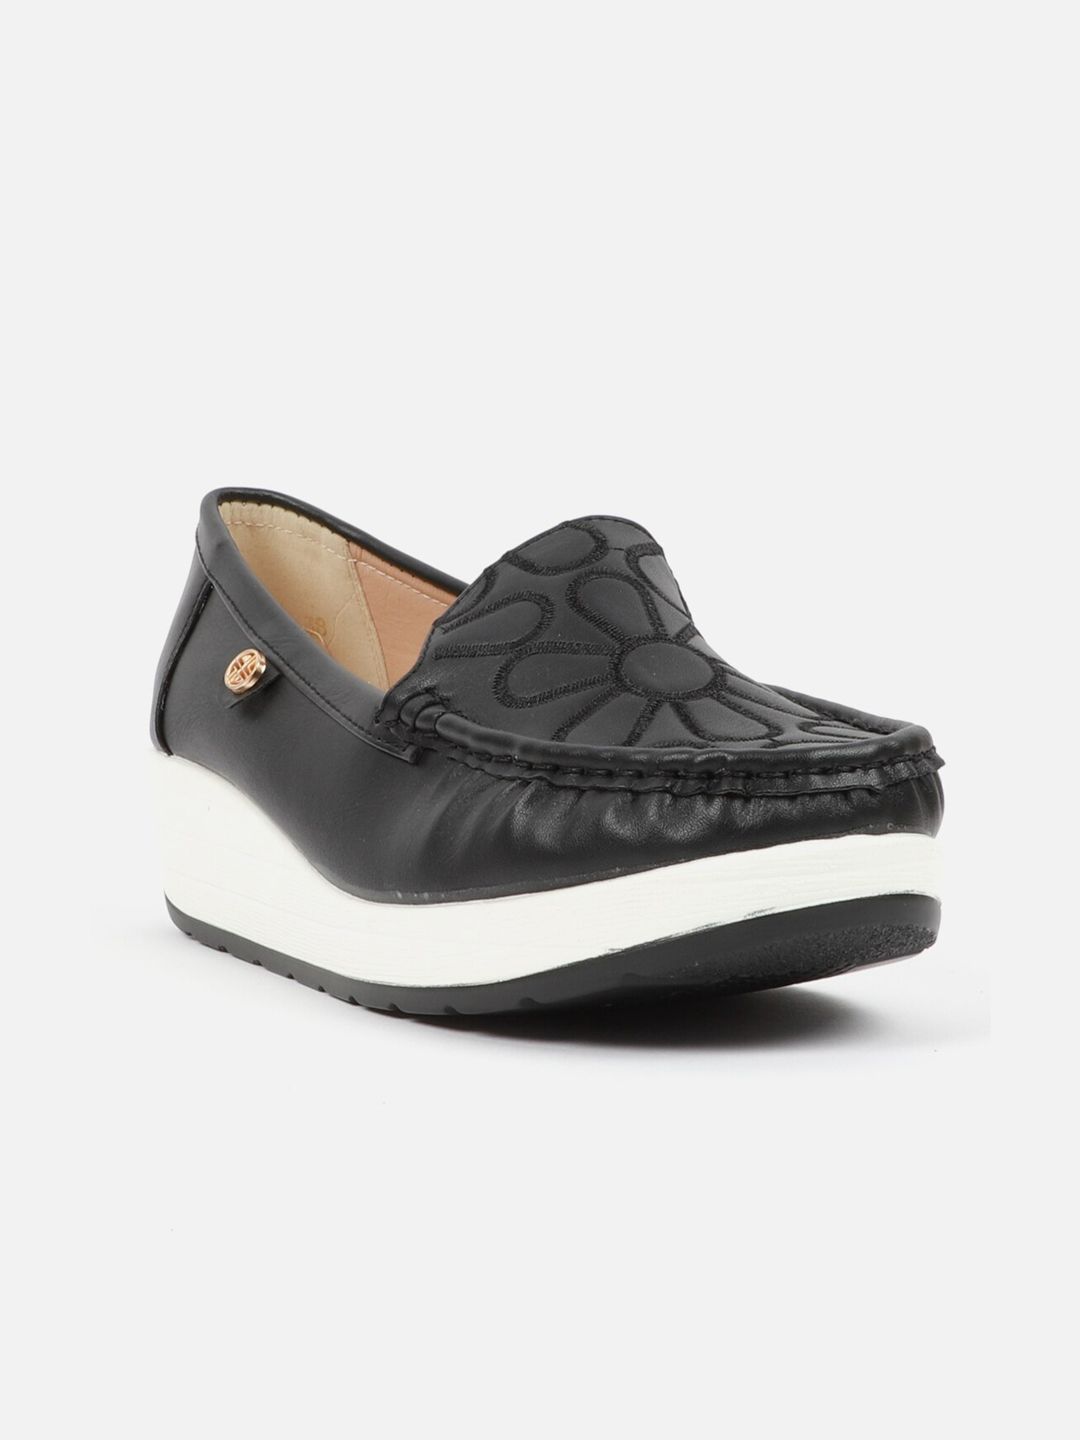 Carlton London Women Black Textured Loafers Price in India